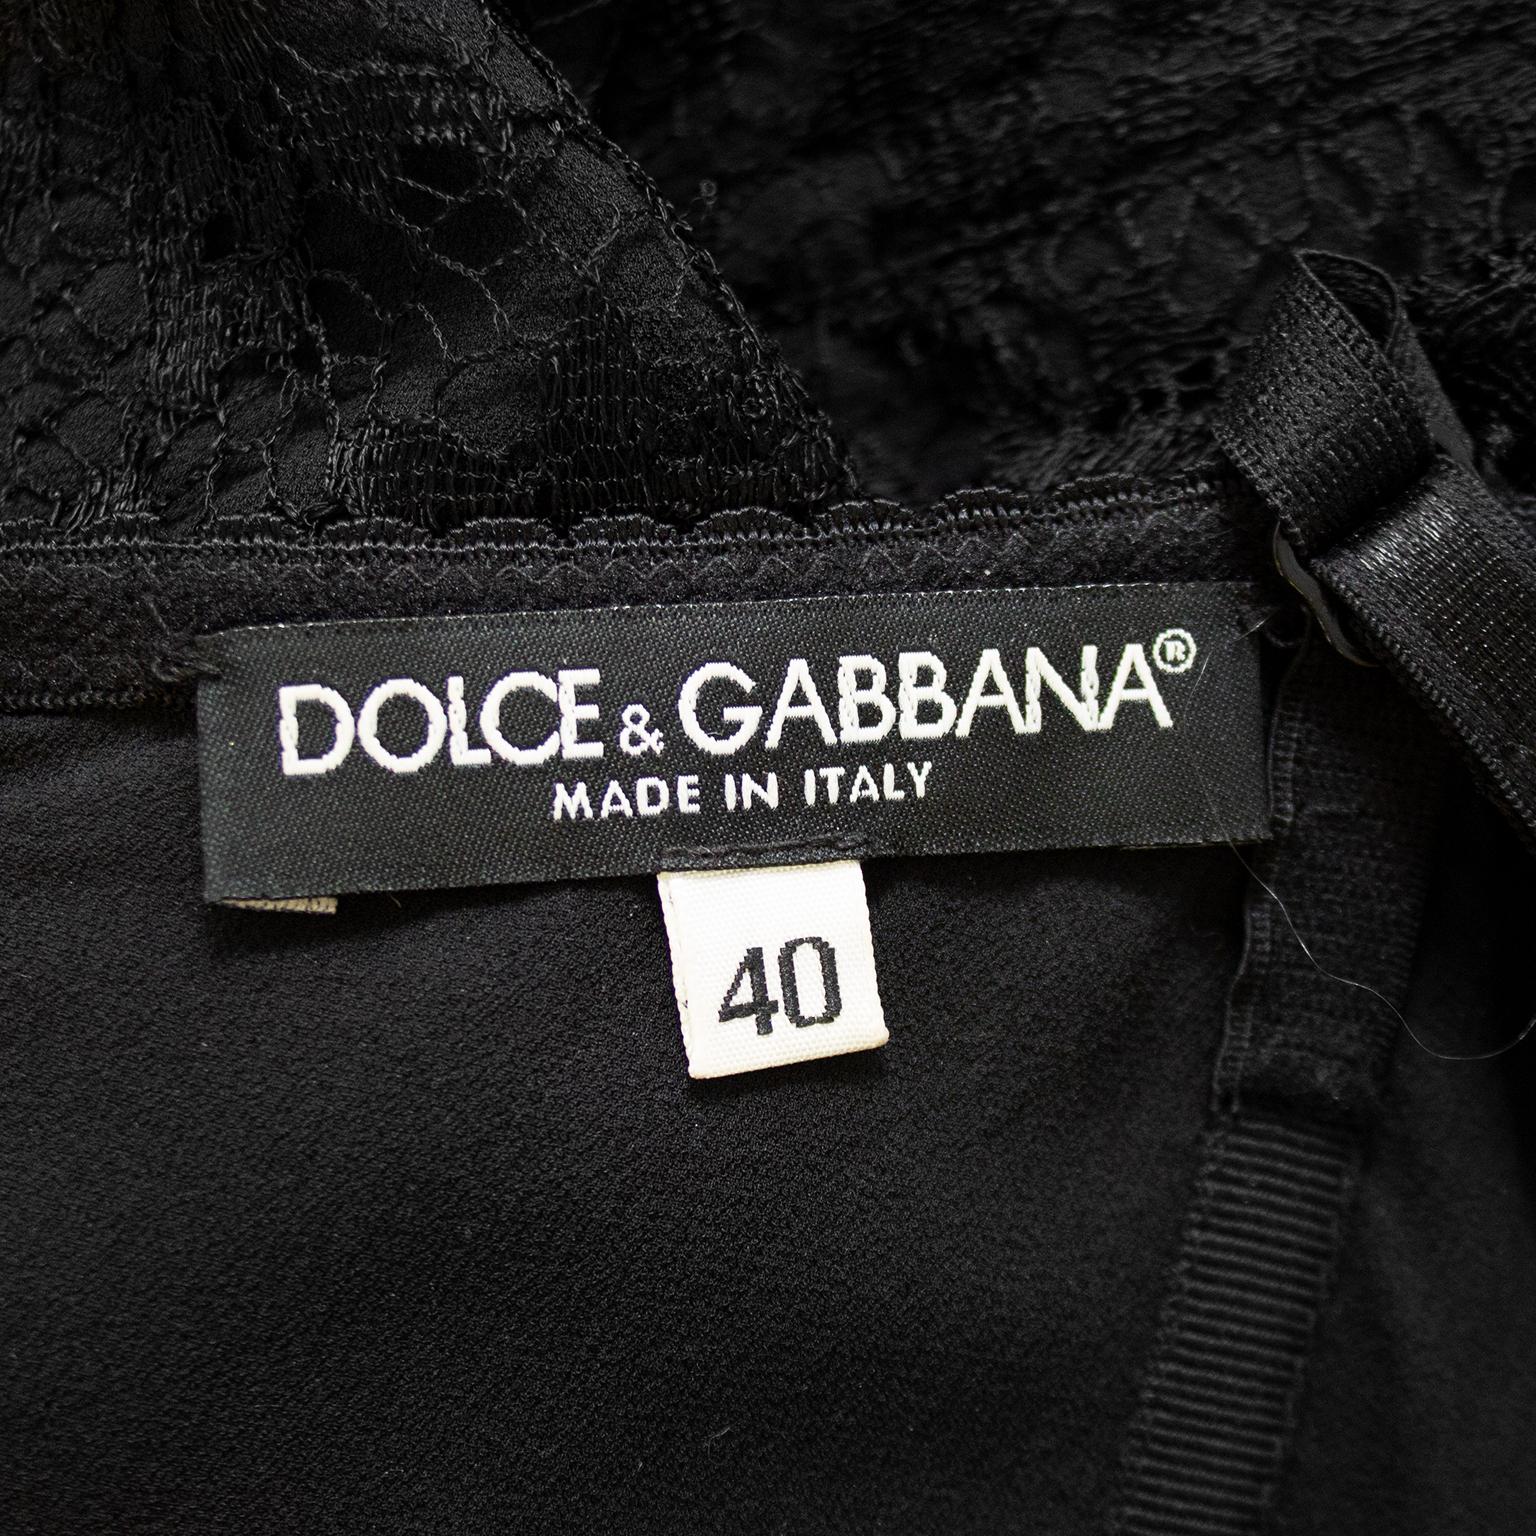 Early 2000s Dolce and Gabbana Black Lace Cocktail Dress For Sale 2